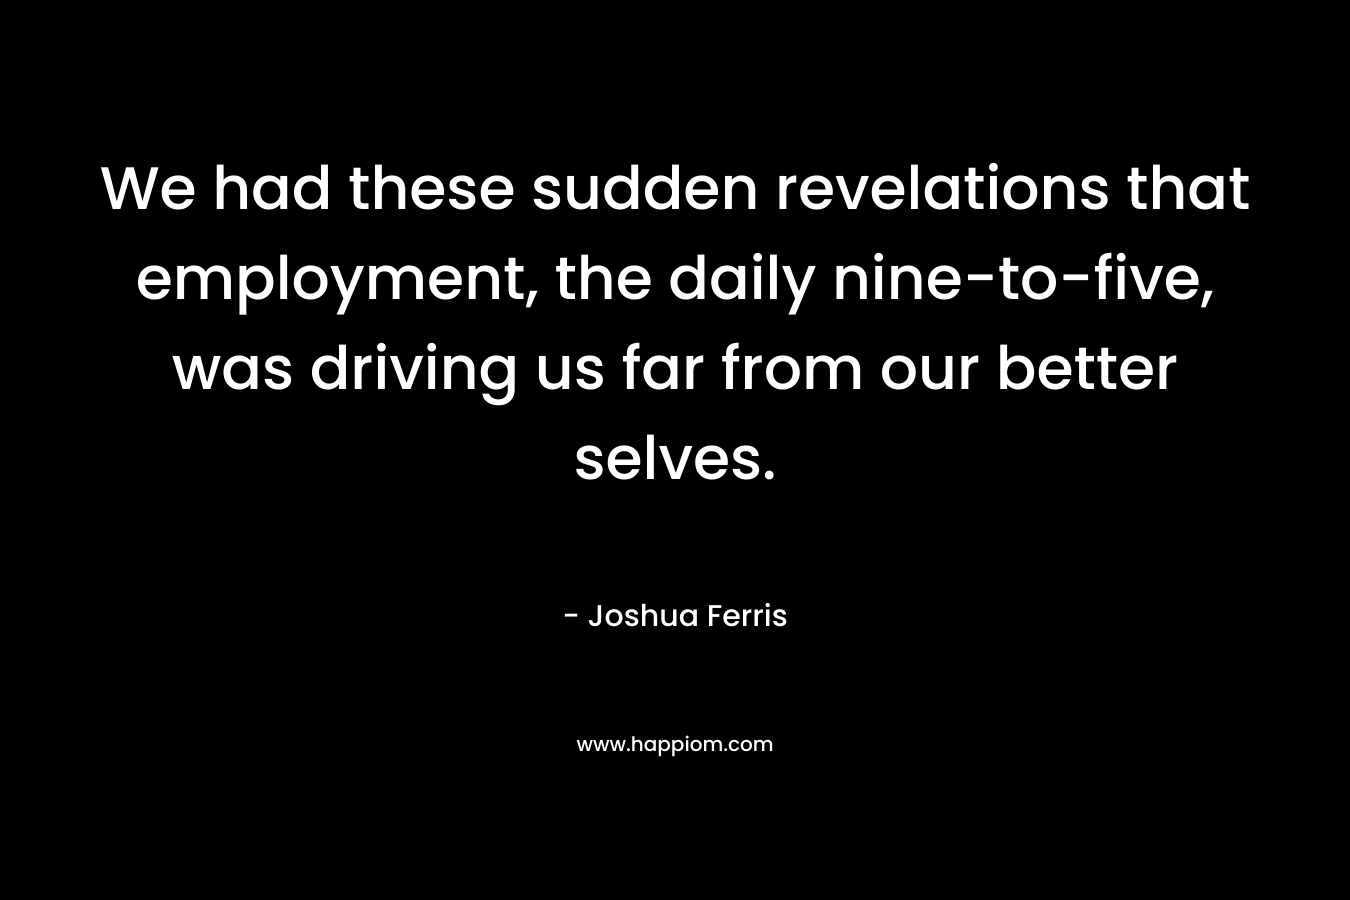 We had these sudden revelations that employment, the daily nine-to-five, was driving us far from our better selves. – Joshua Ferris